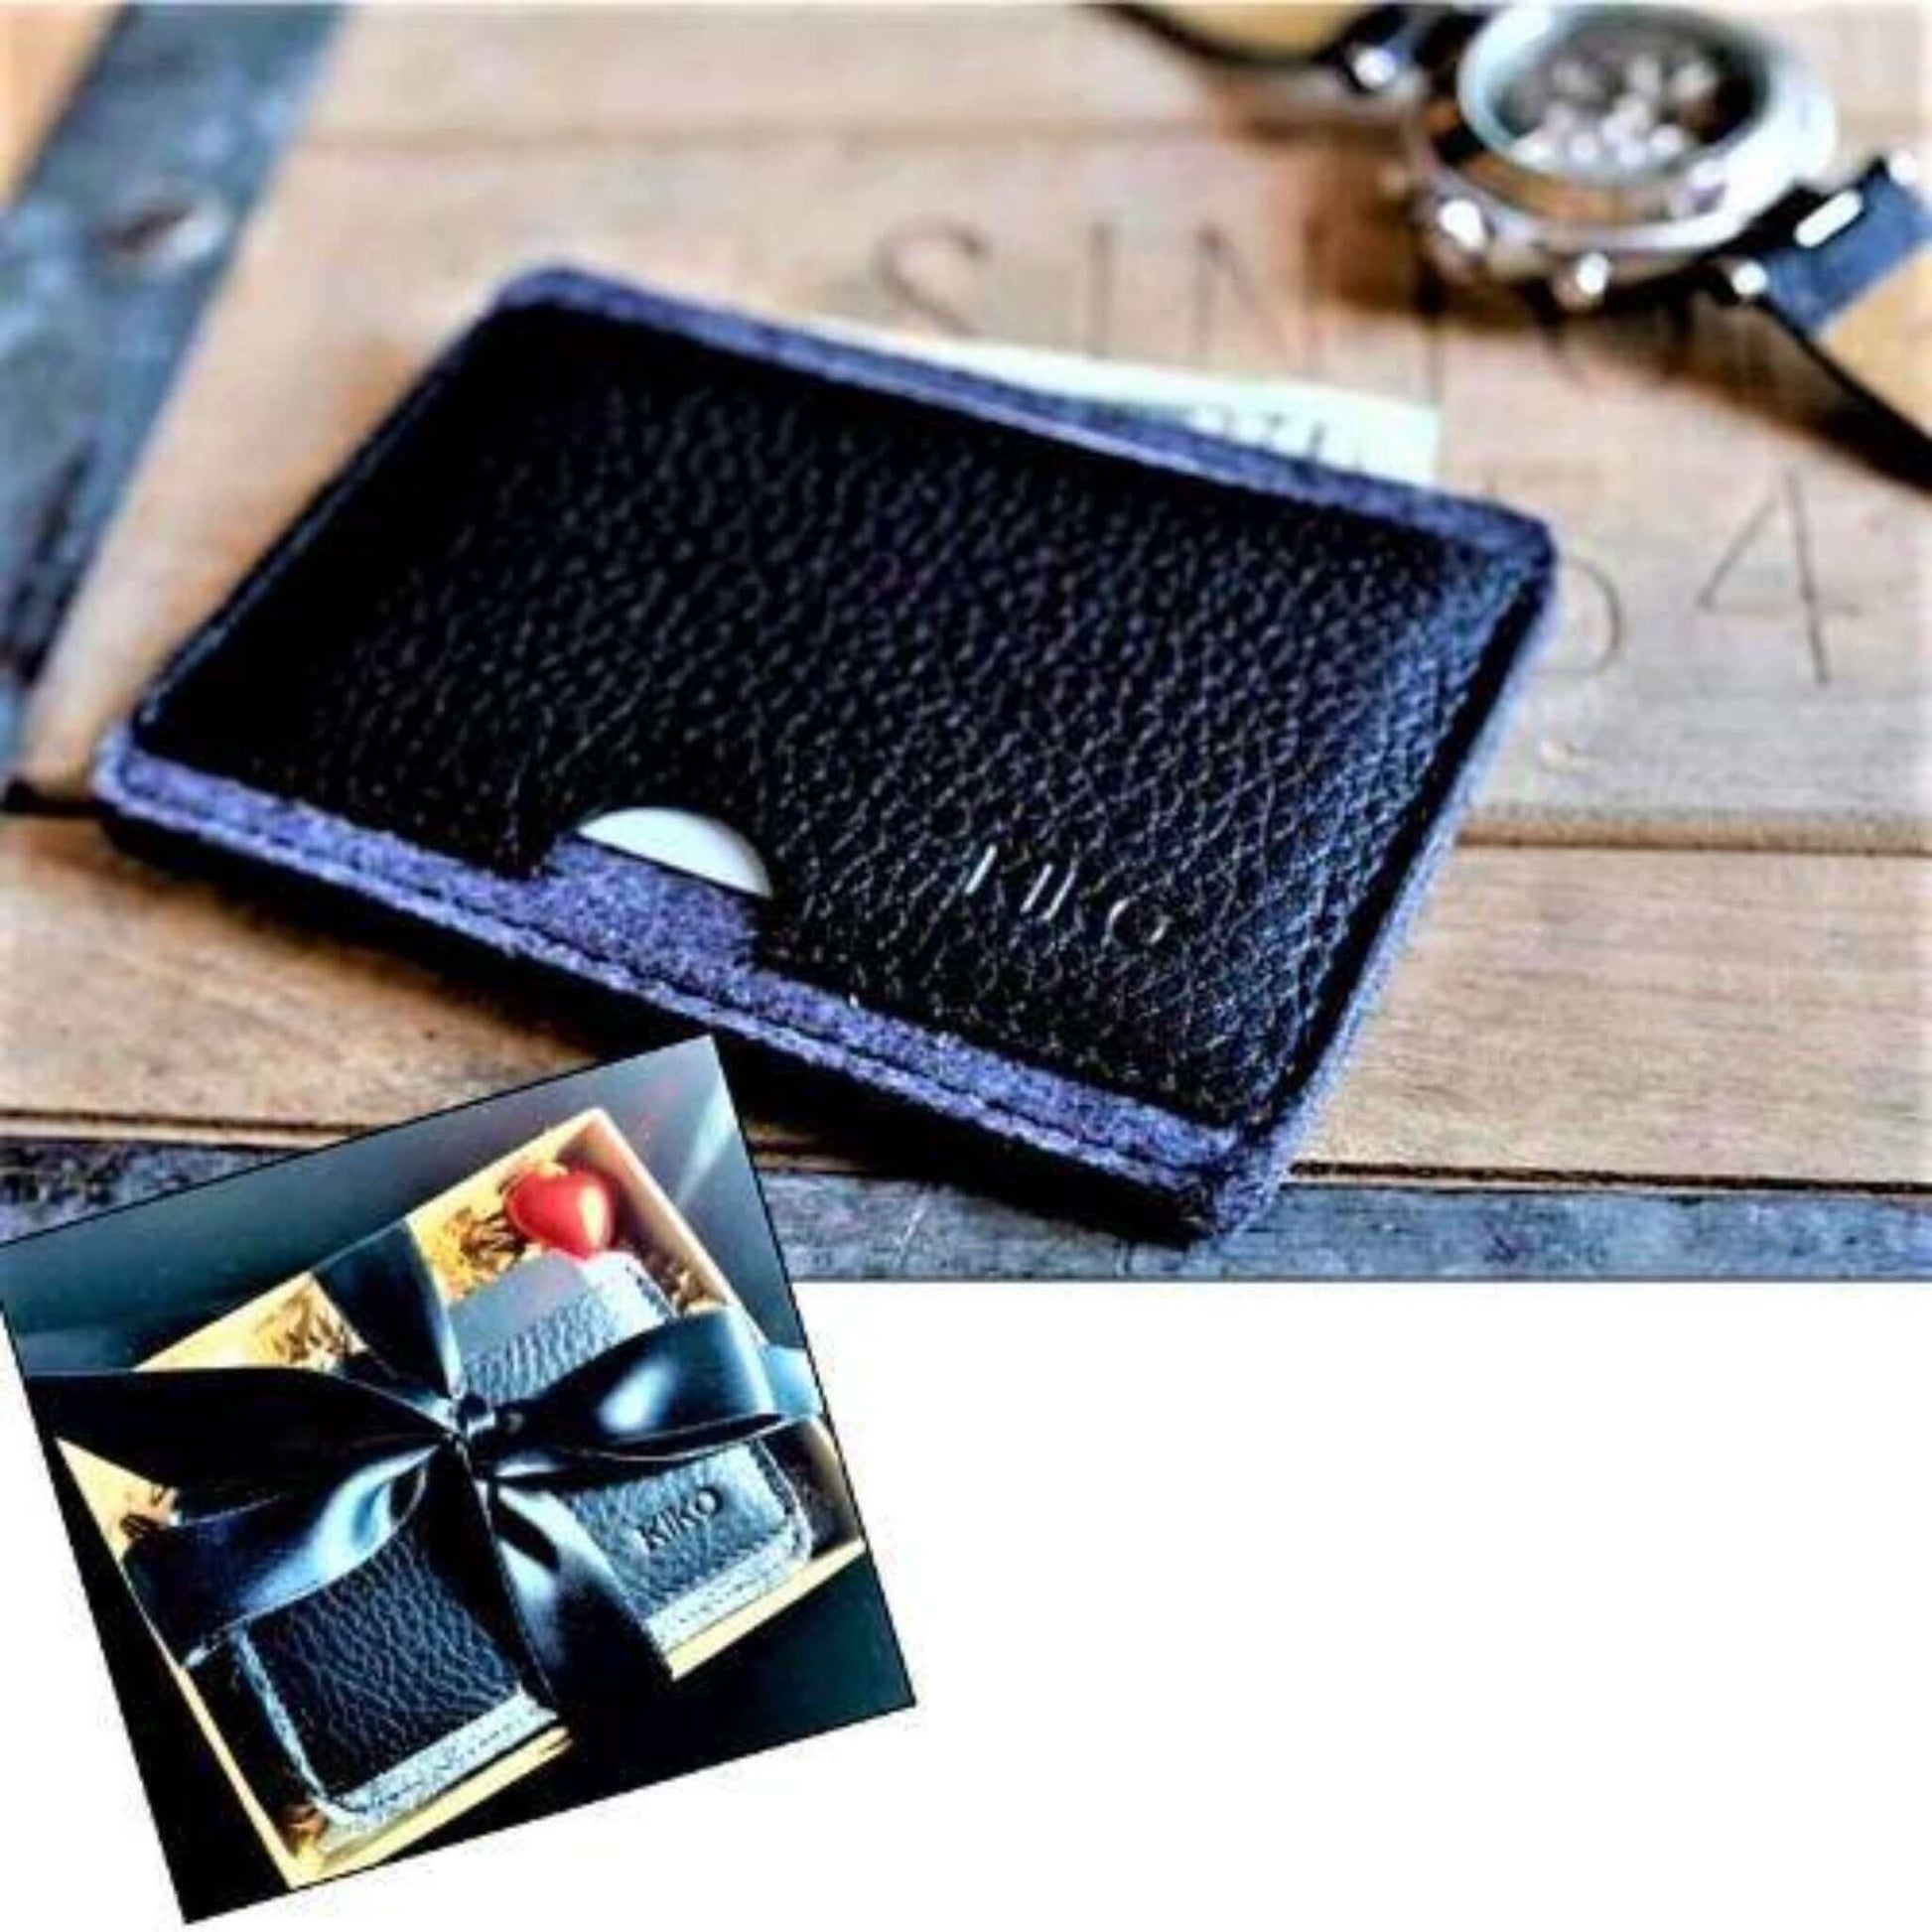 Compact black leather wallet with card slots on a wooden surface, accompanied by a gift box.